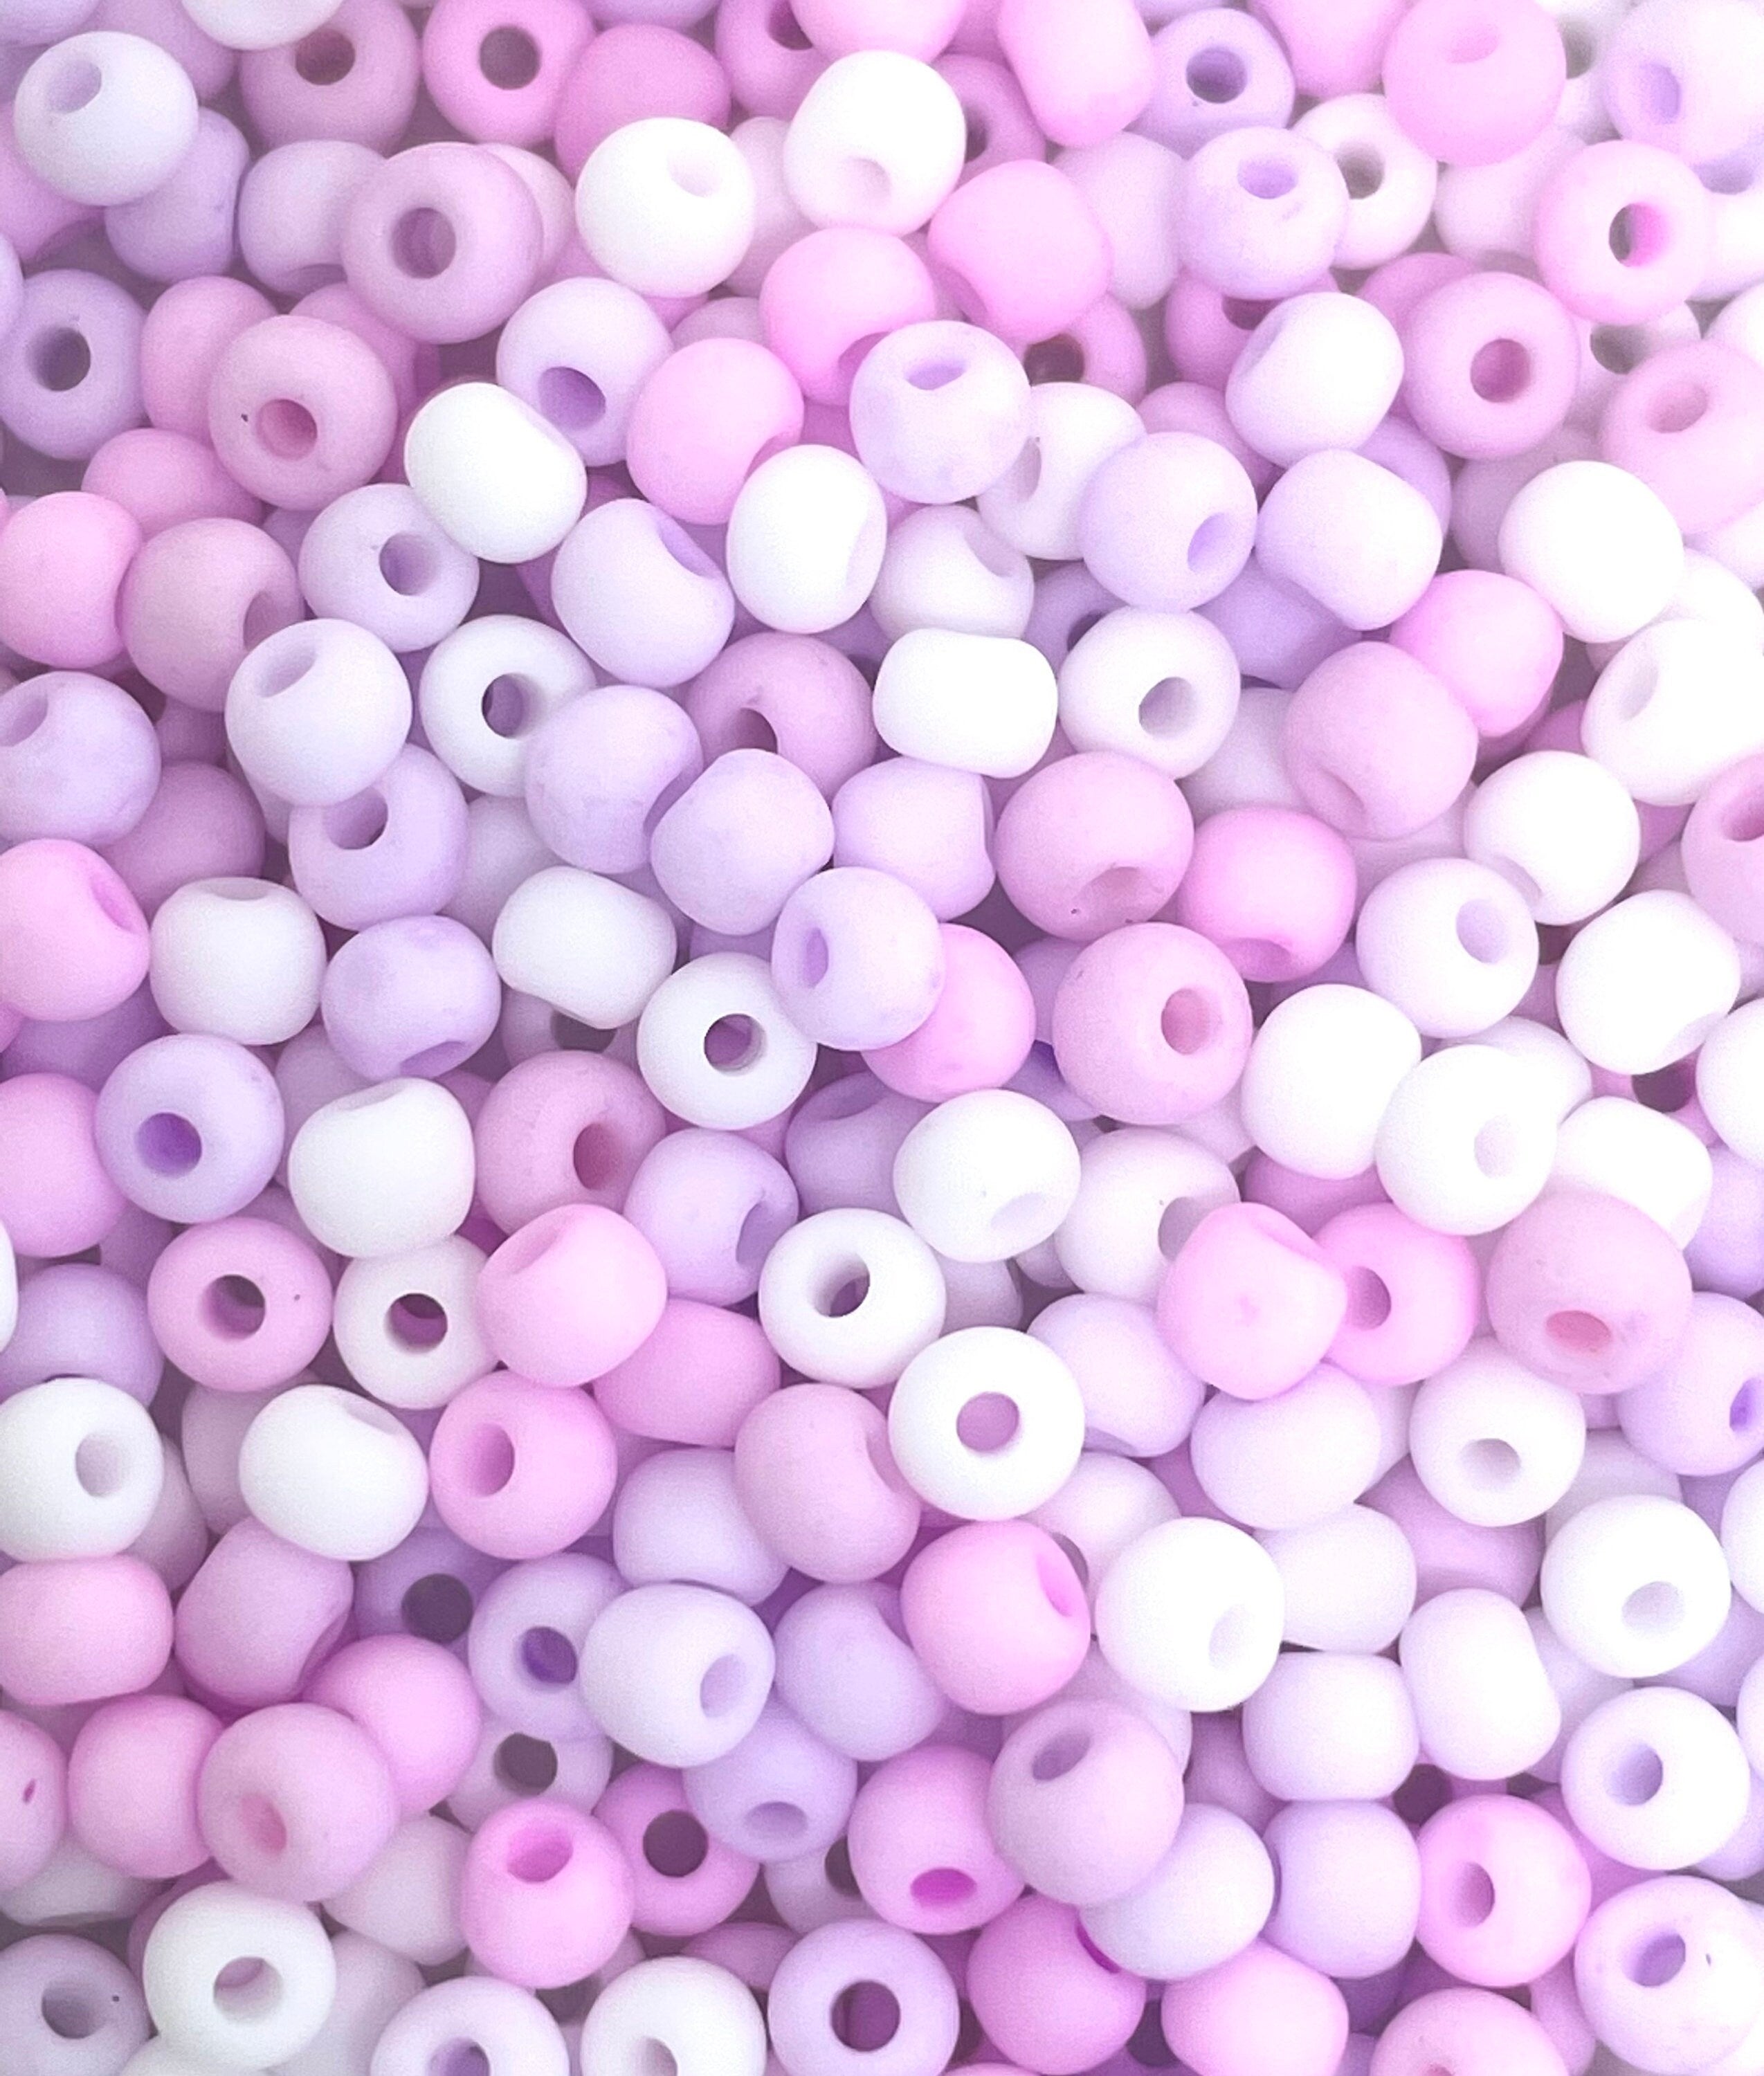 Tiny Seed Beads Ice Cream Mix, Purple, Pink, and White Seed Beads for Jewelry Making, Beading Supplies for Delicate Necklace, Dainty Beads